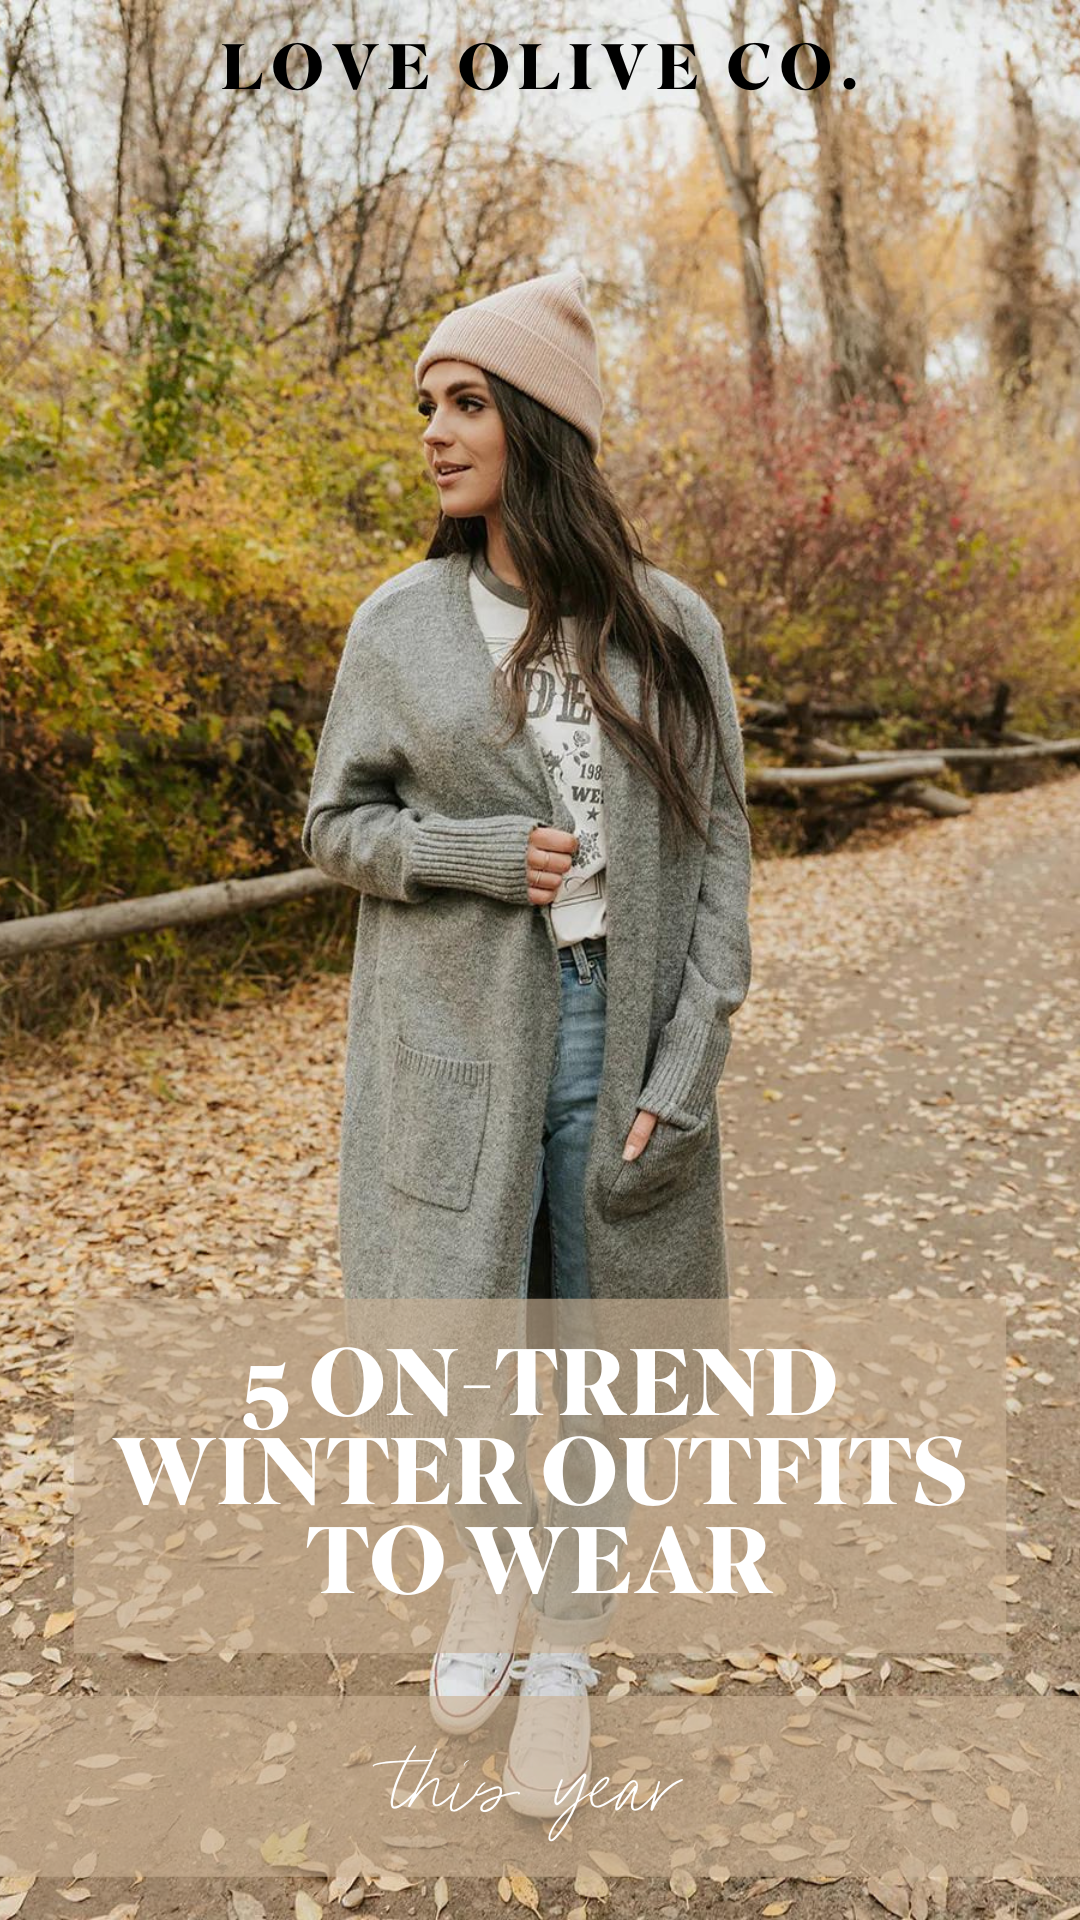 5 on-trend winter outfits to wear this season. www.loveoliveco.com